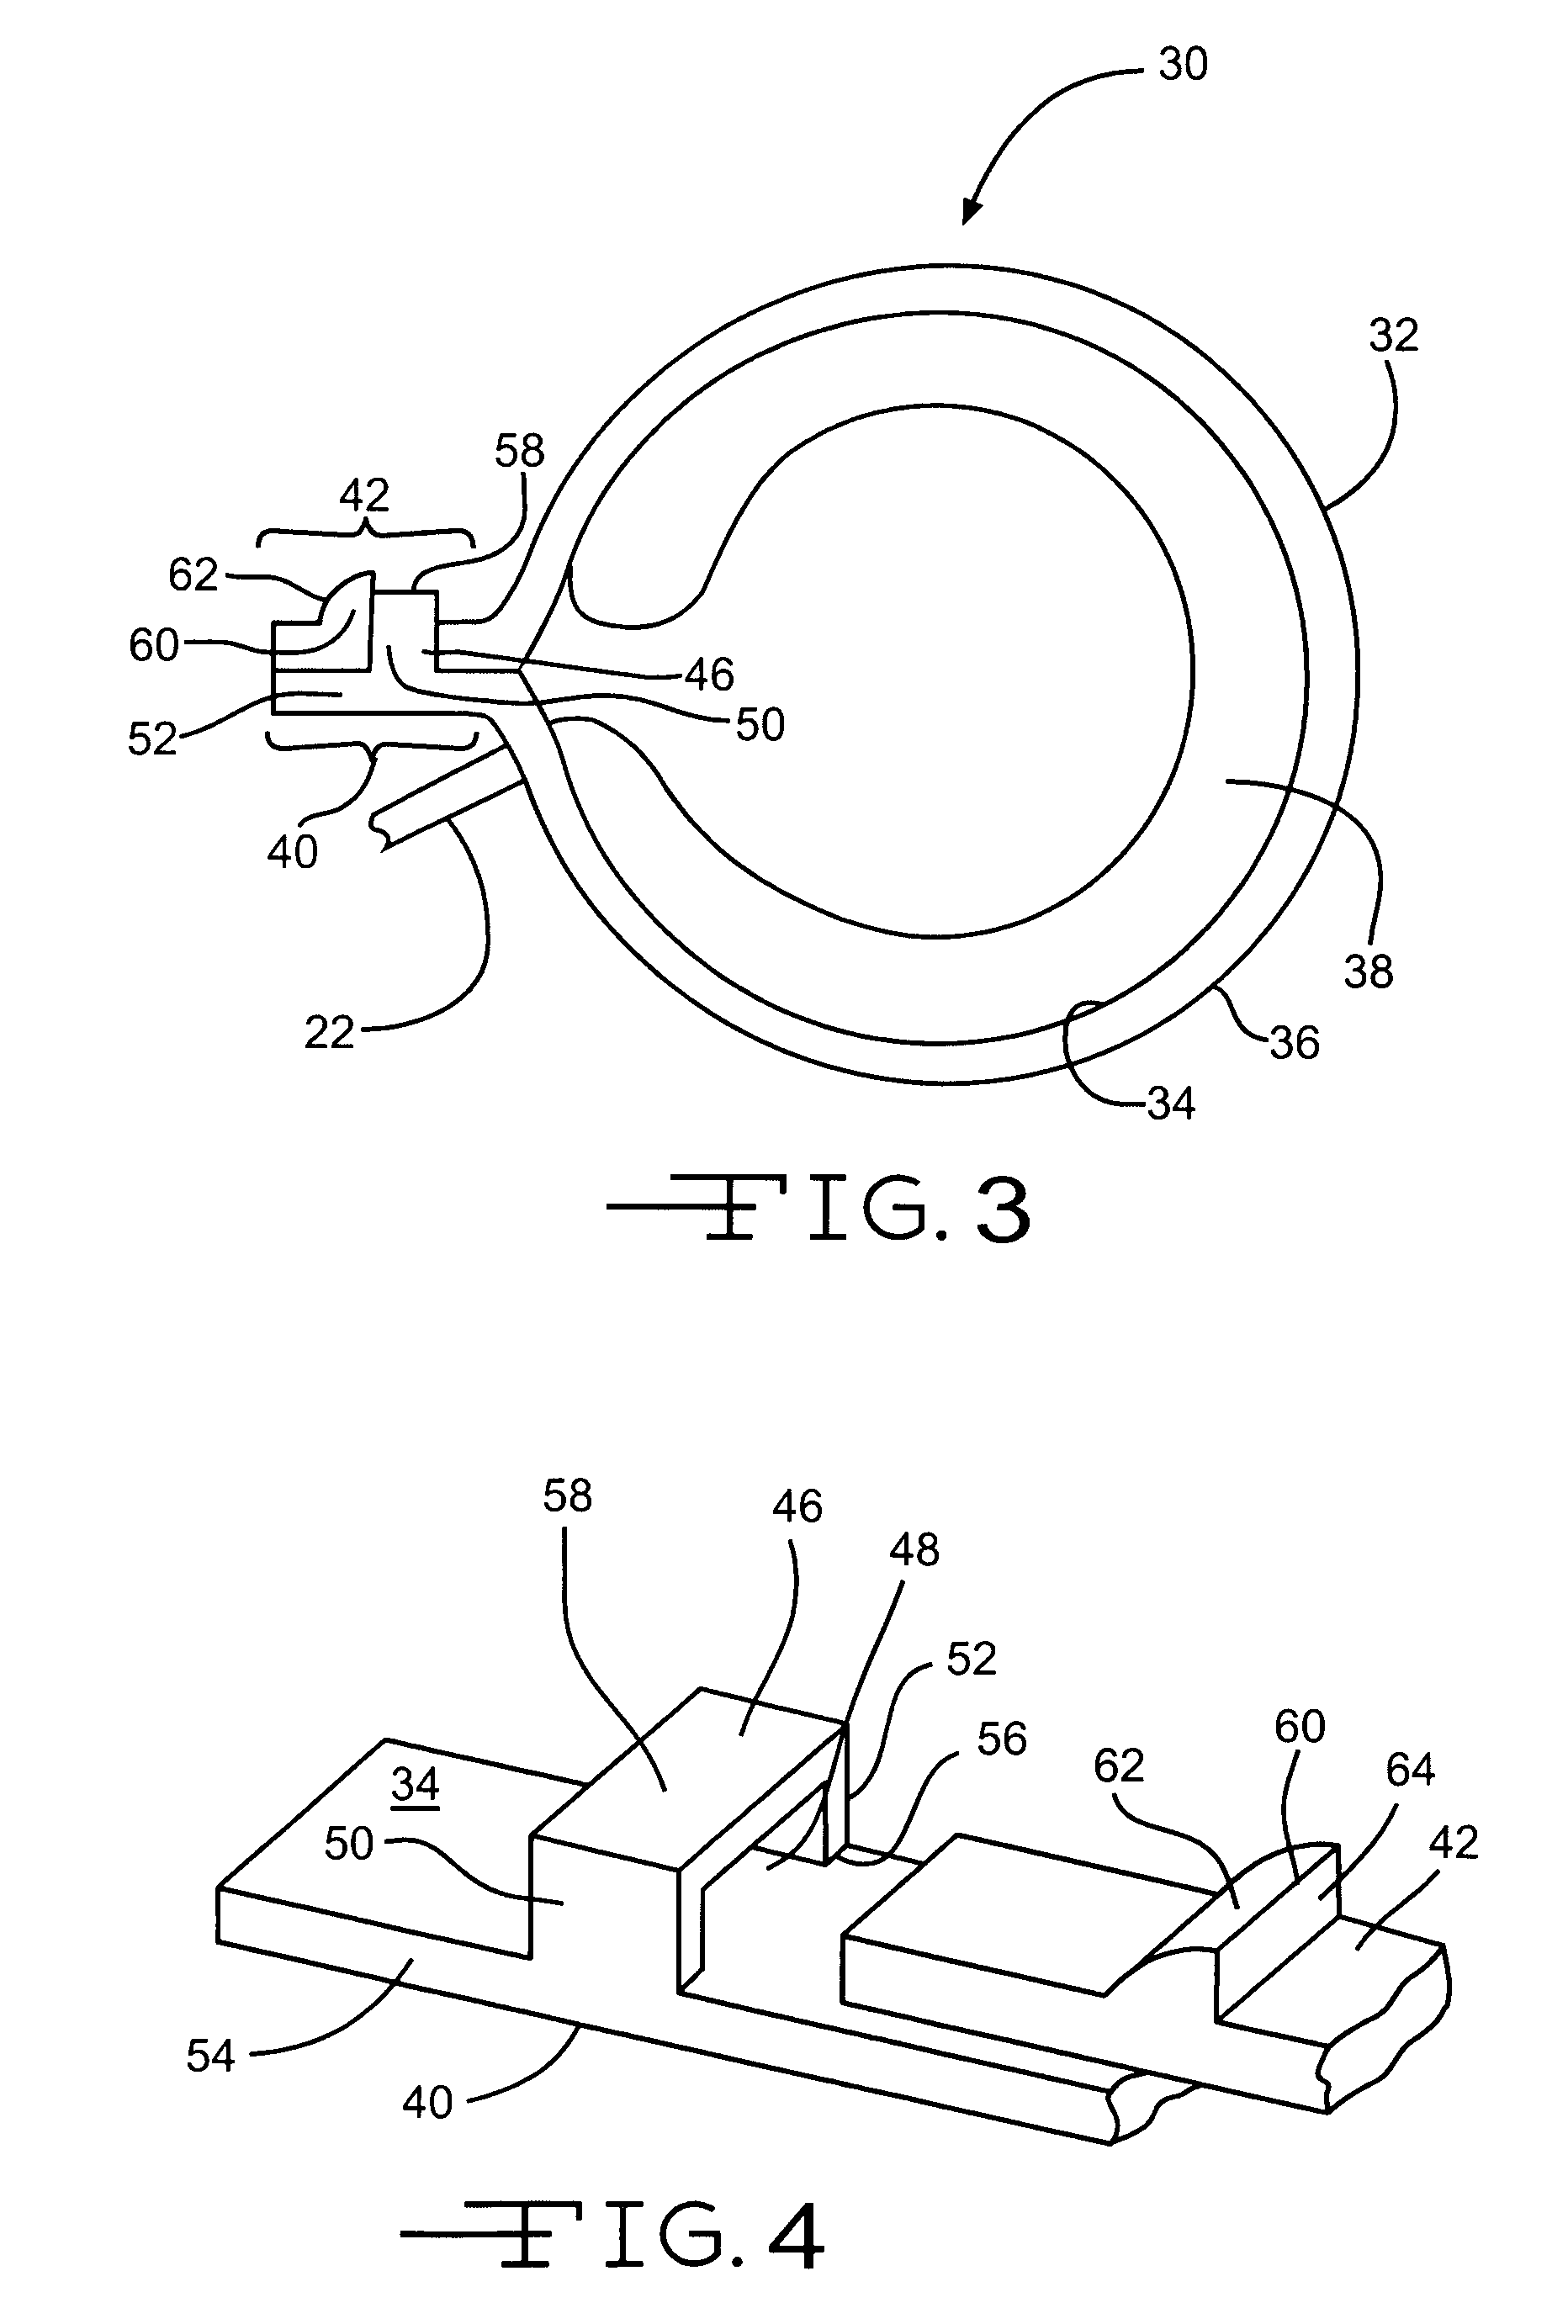 Implantable band with attachment mechanism